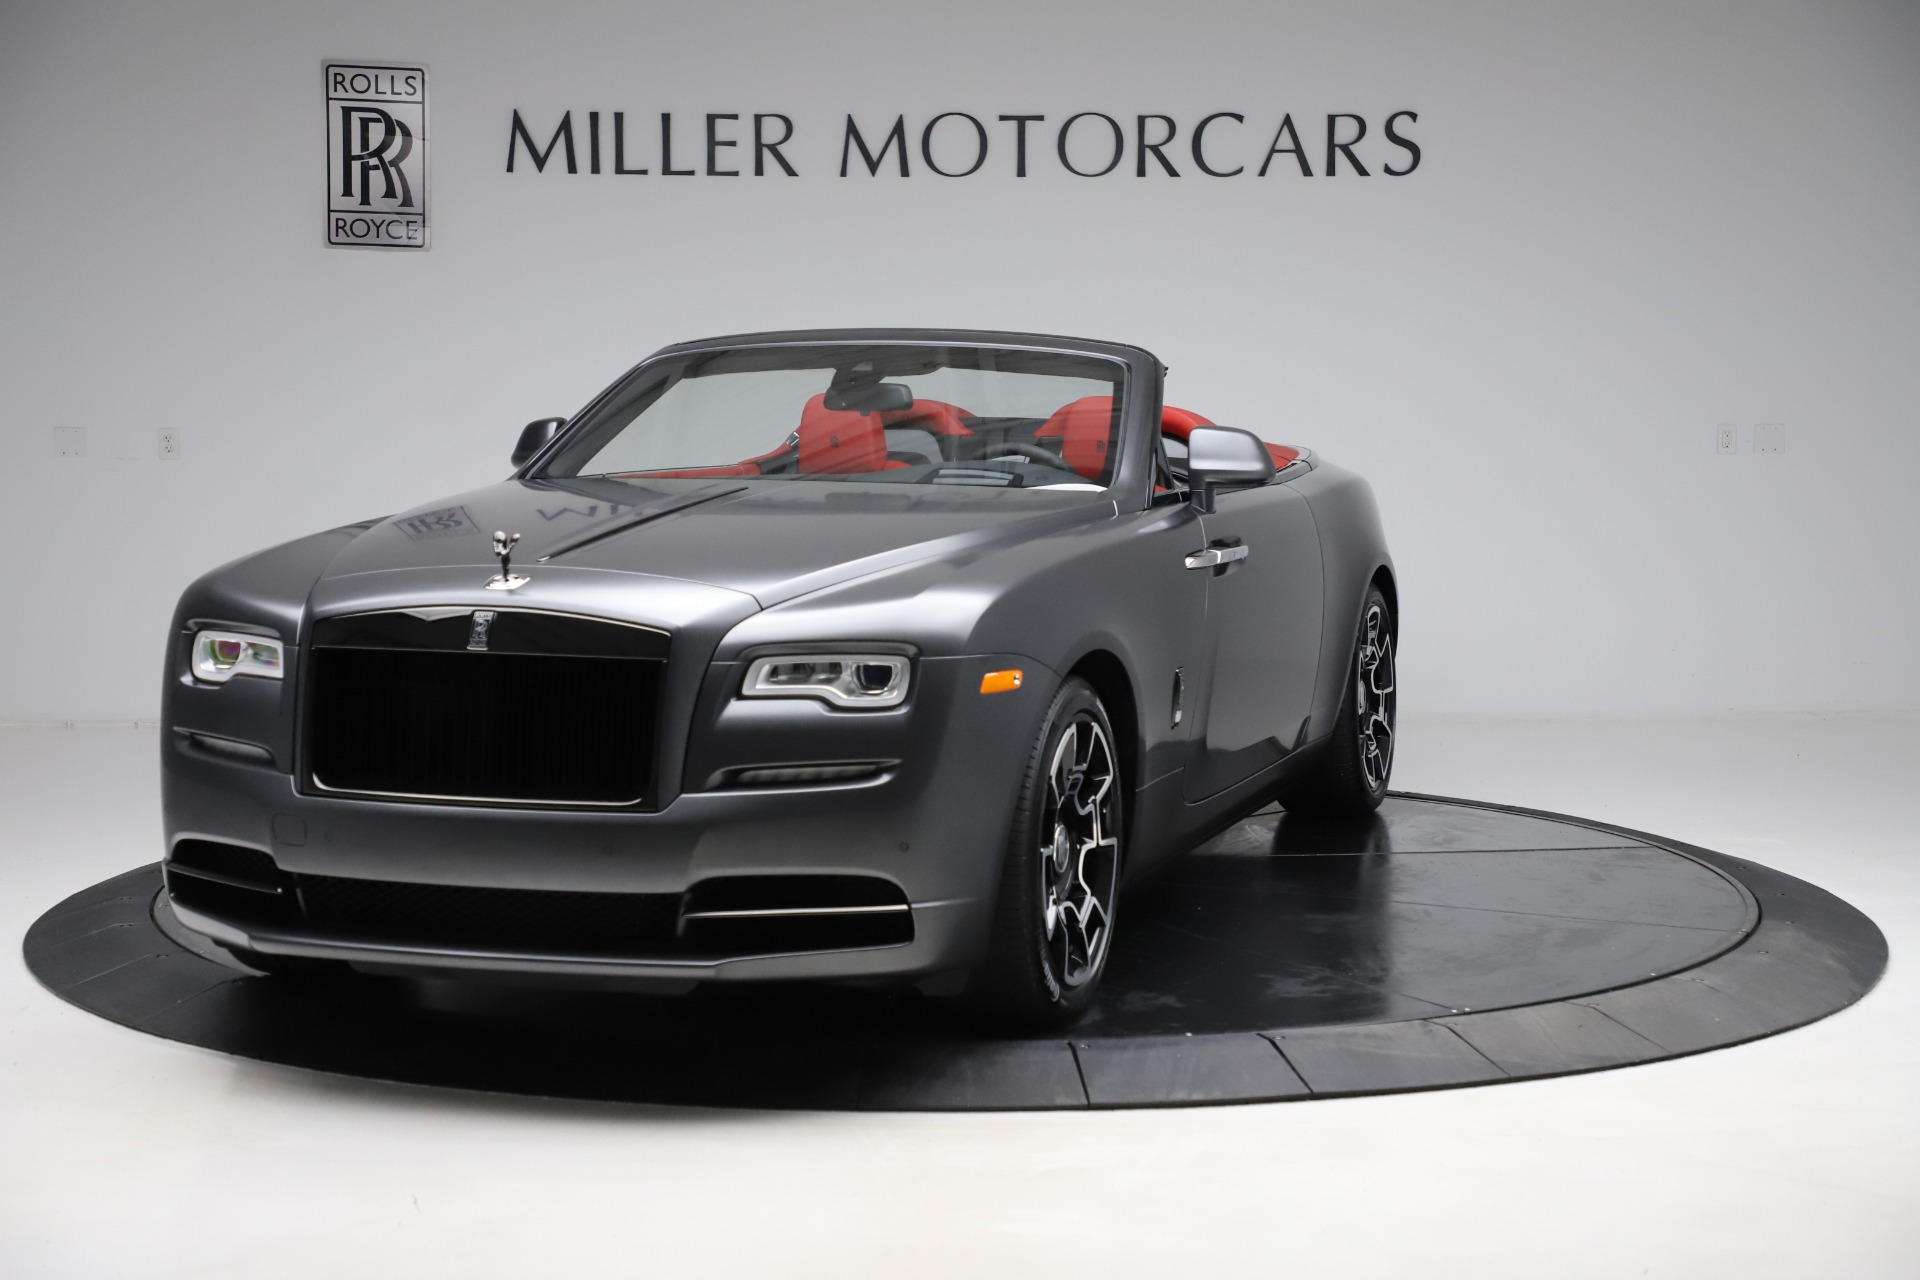 Roll In Stylish Luxury With This 2016 RollsRoyce Dawn Convertible